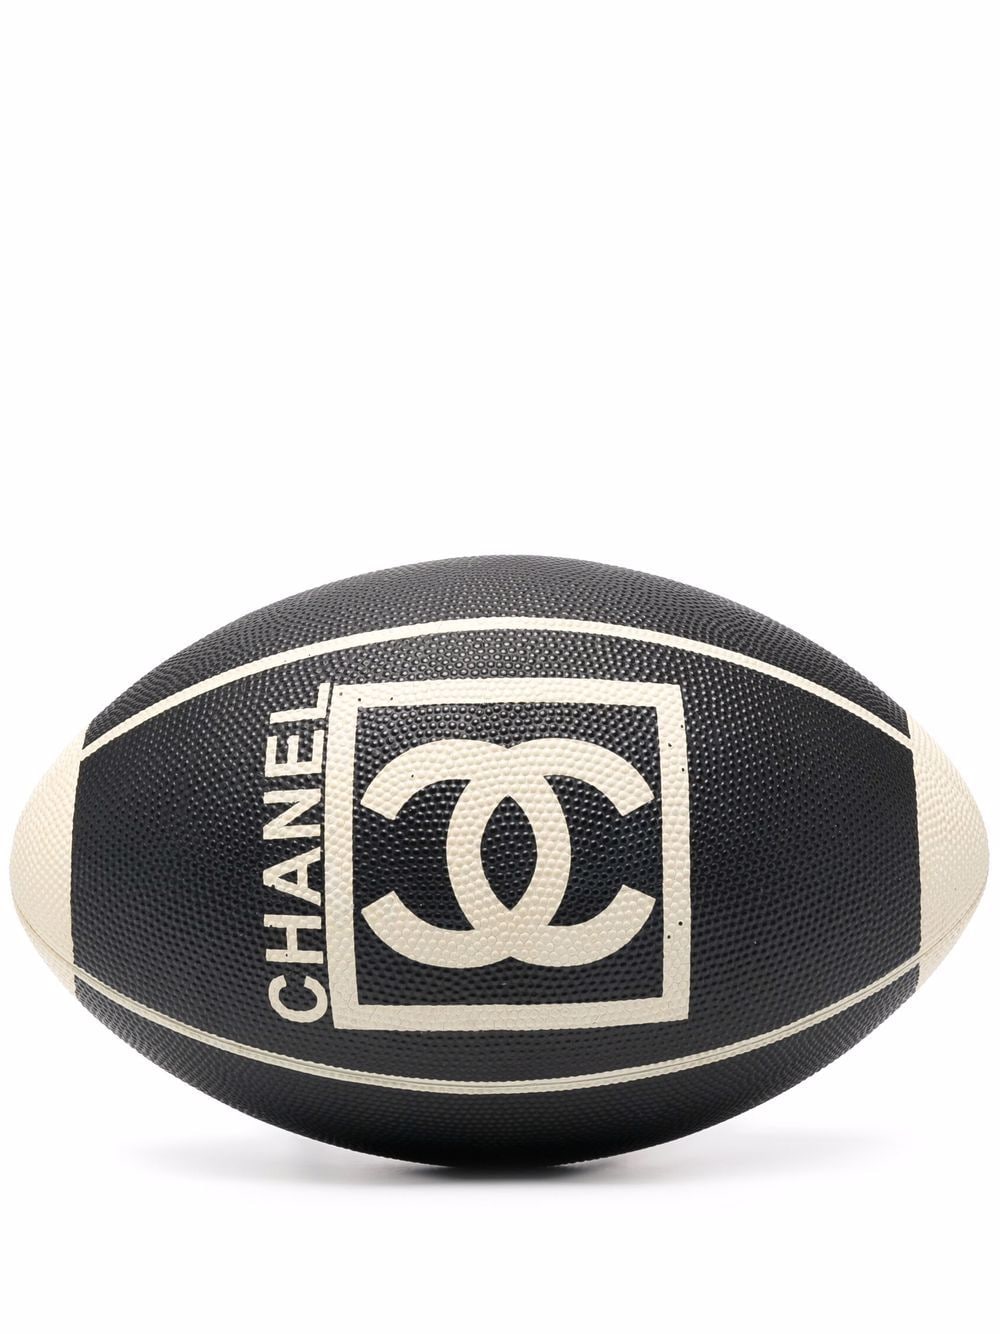 CHANEL Pre-Owned 2000s CC logo rugby ball - Black von CHANEL Pre-Owned